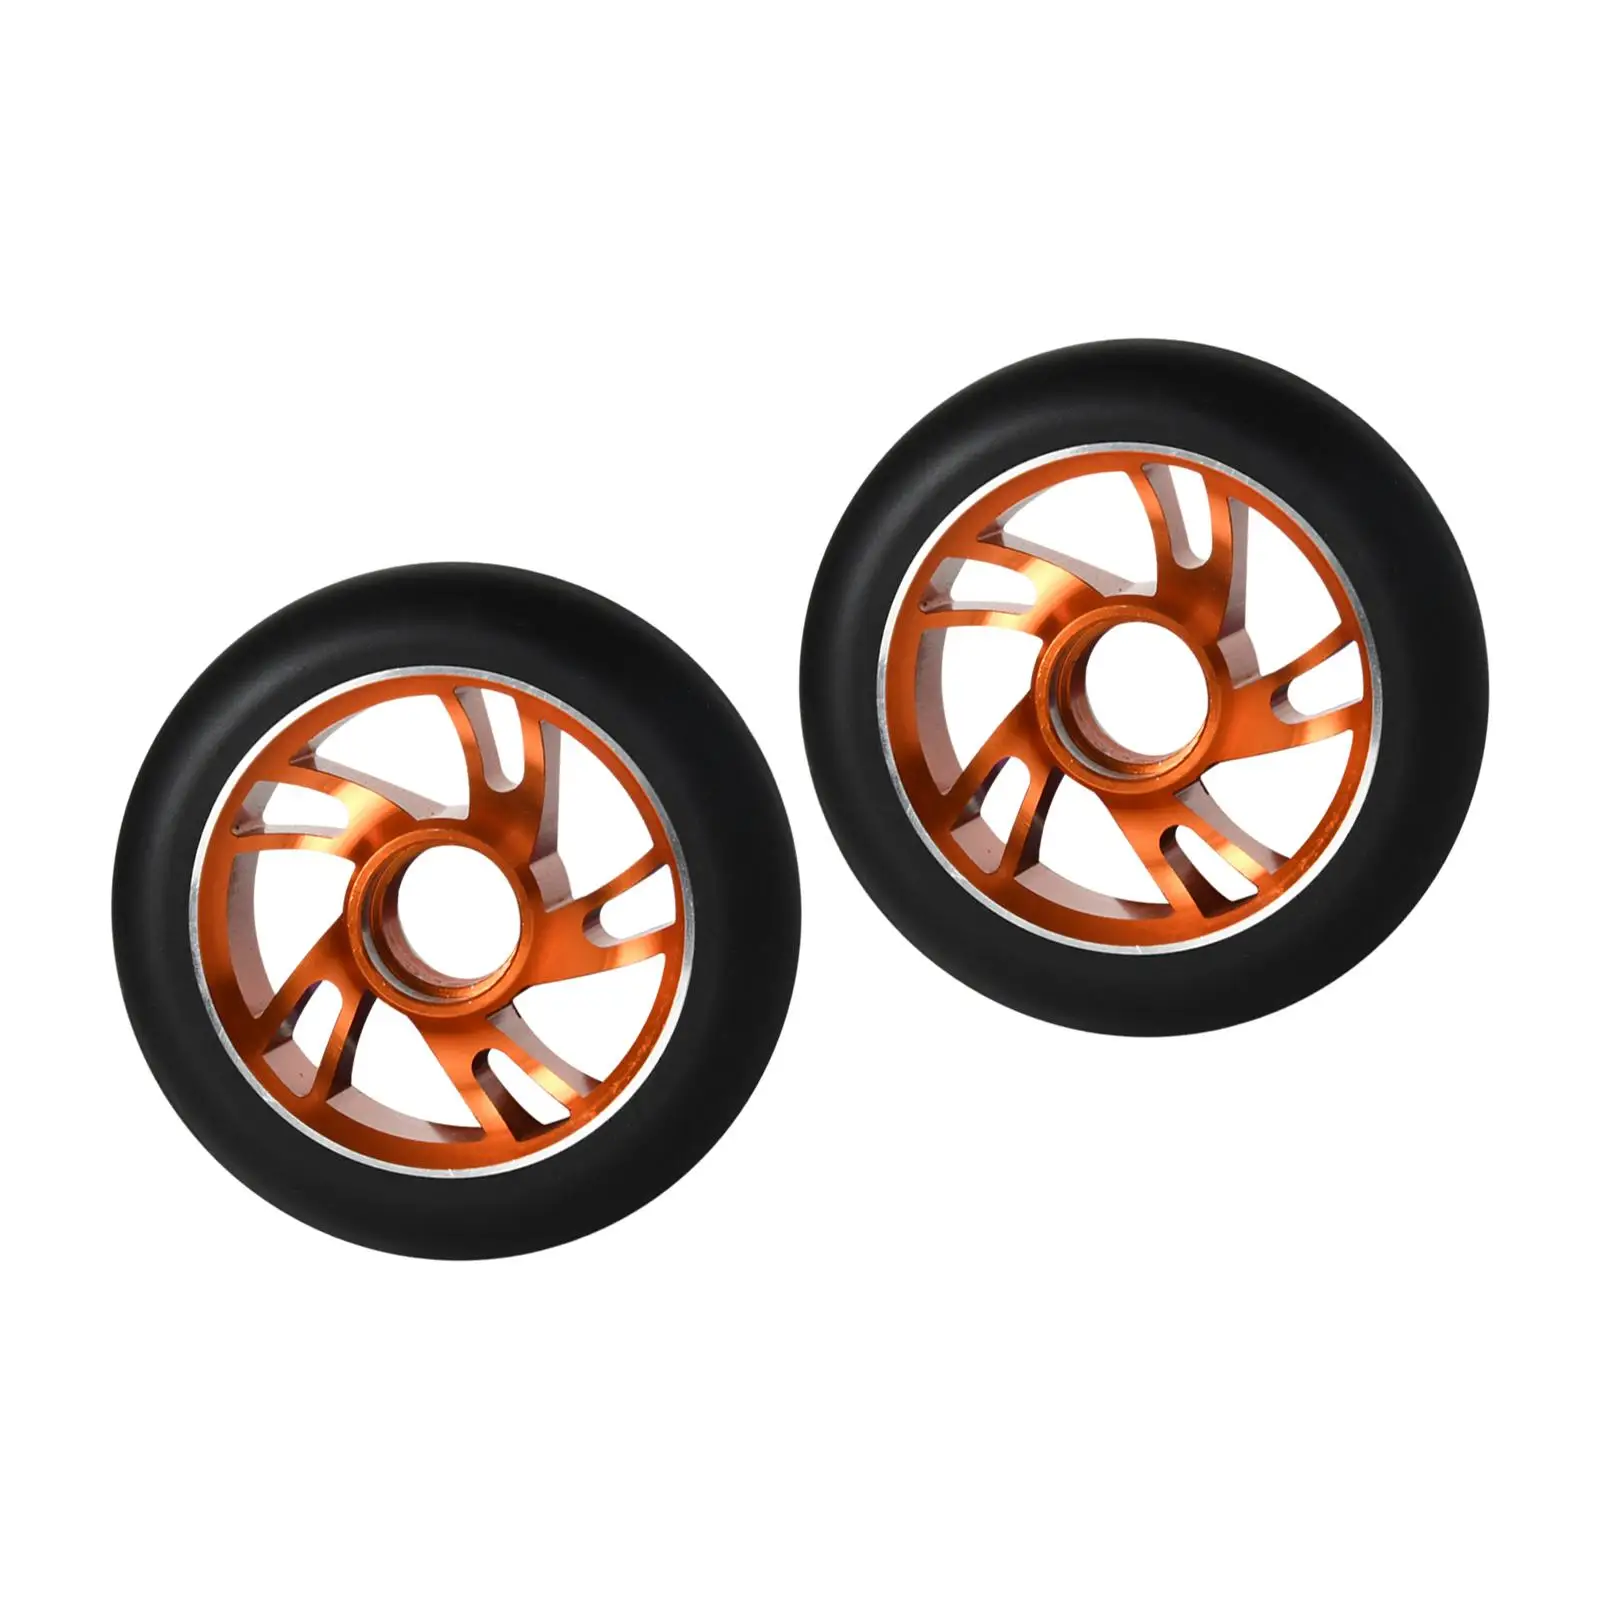 2x Scooter Replacement Wheels Wear Resistant Aluminium Alloy Professional 100mm for Smooth Ride for Scooter Accessories Modified